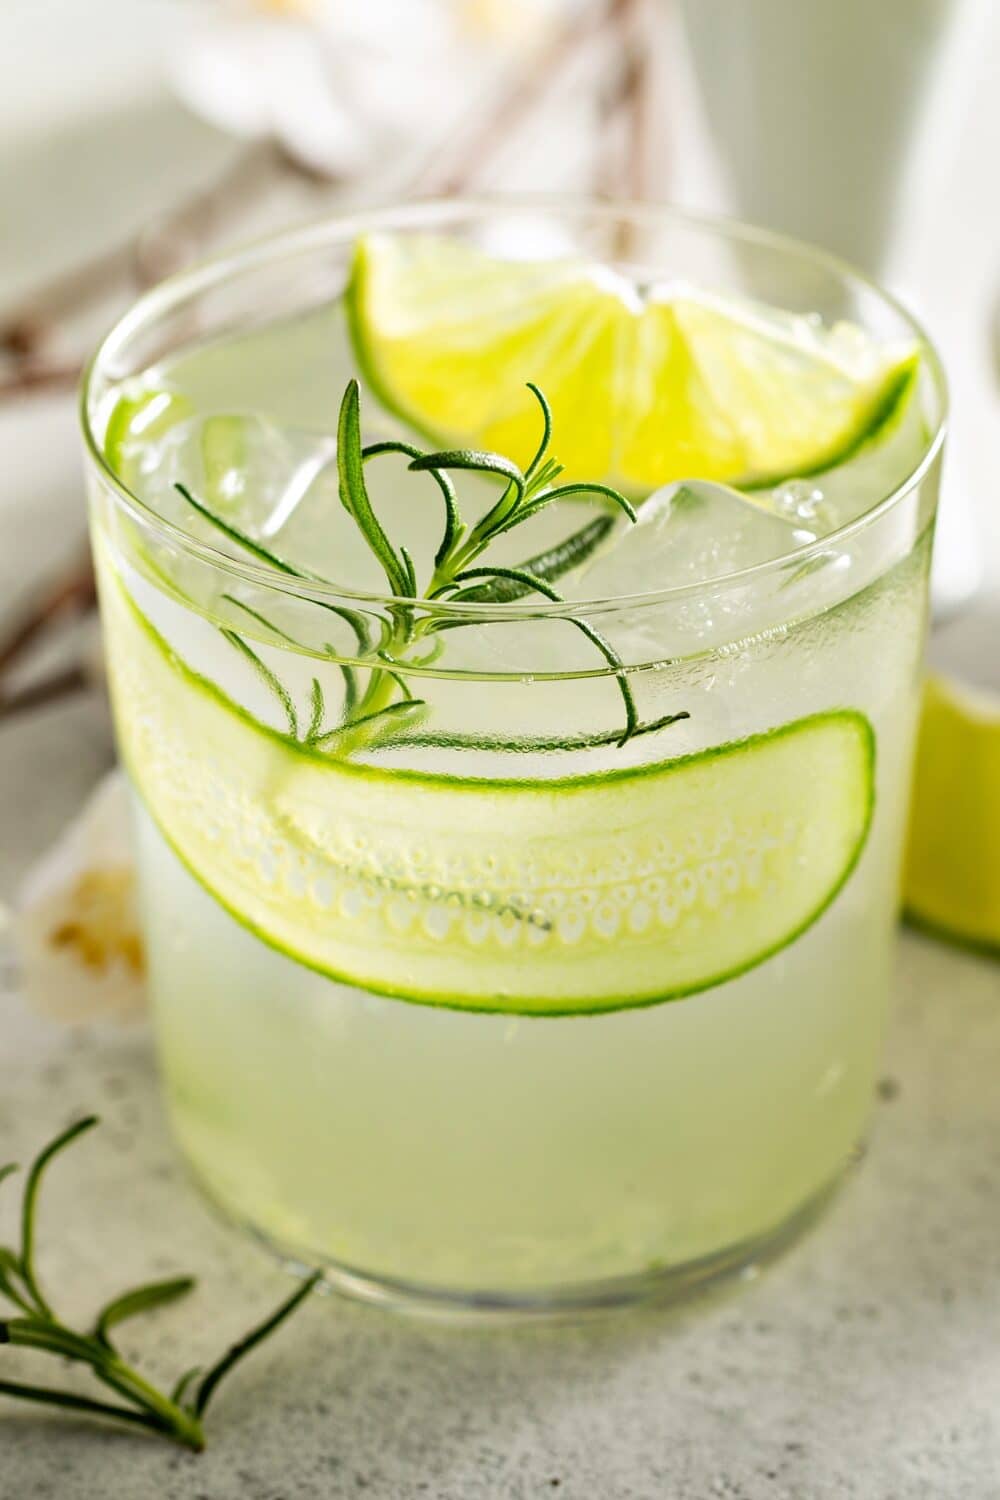 A clear glass filled with a refreshing cucumber gimlet mocktail, garnished with a cucumber slice and lime wedge.